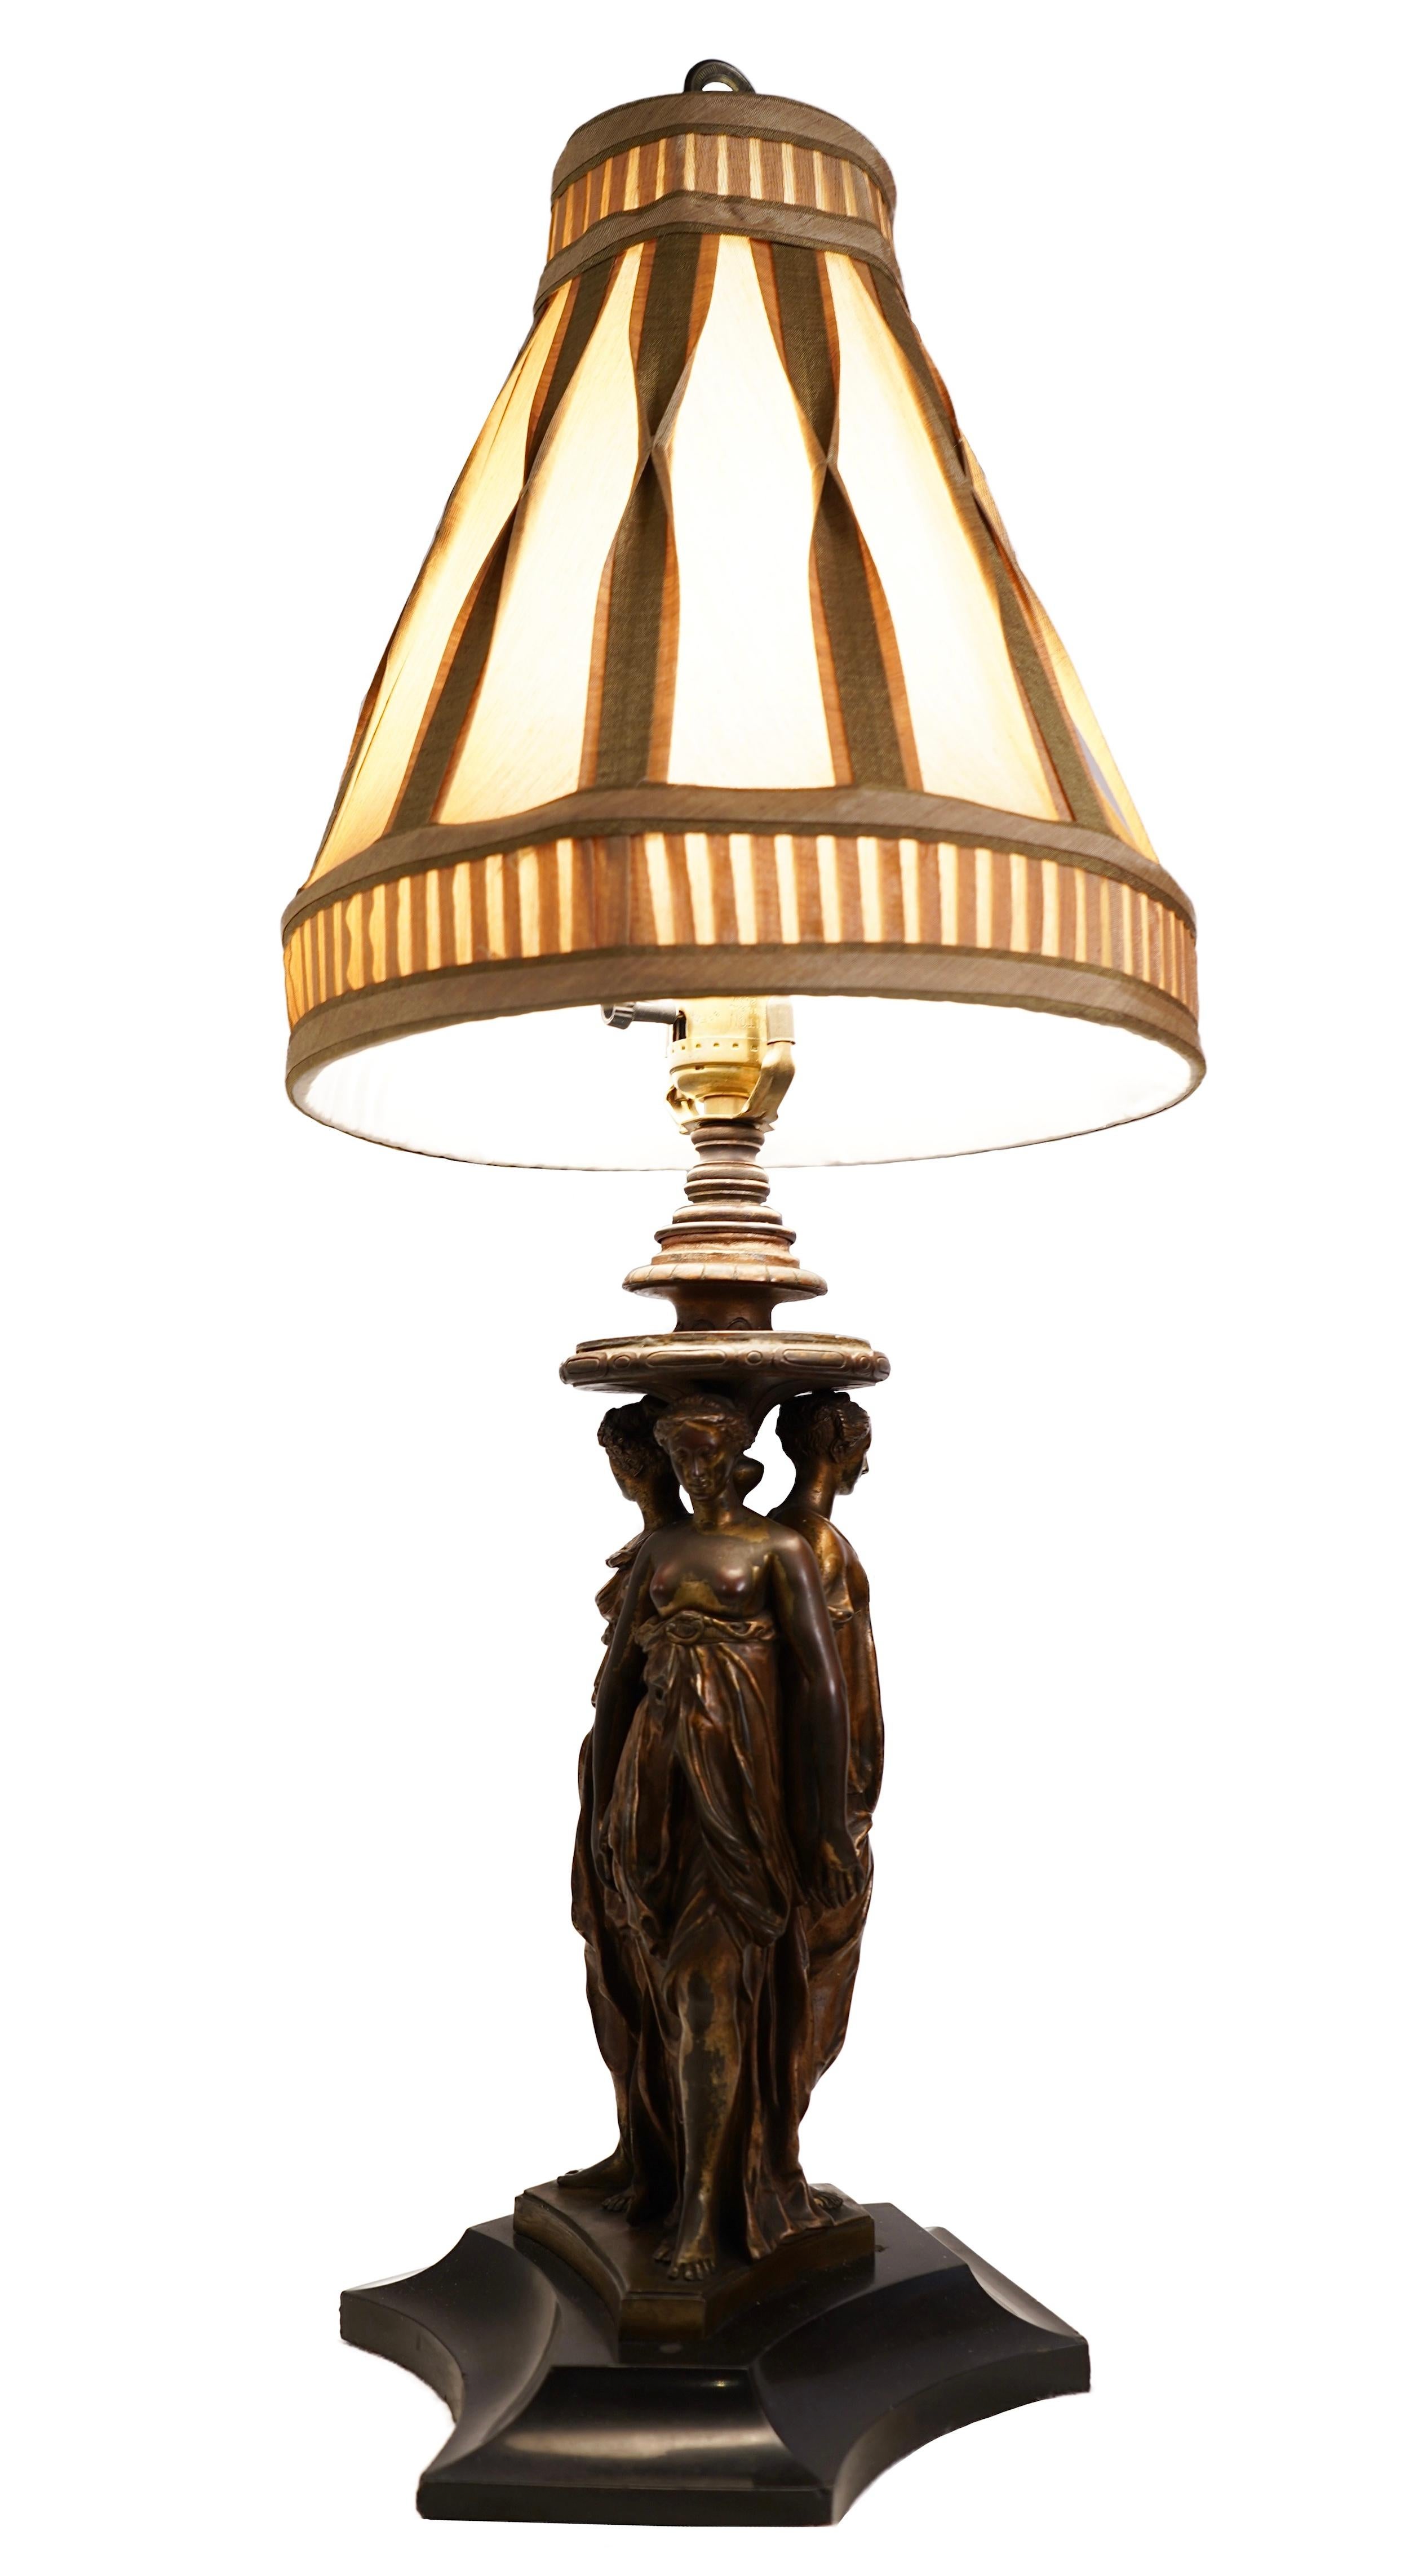 A late 19th century patinated bronze lamp with three goddesses.

Dimensions: 12